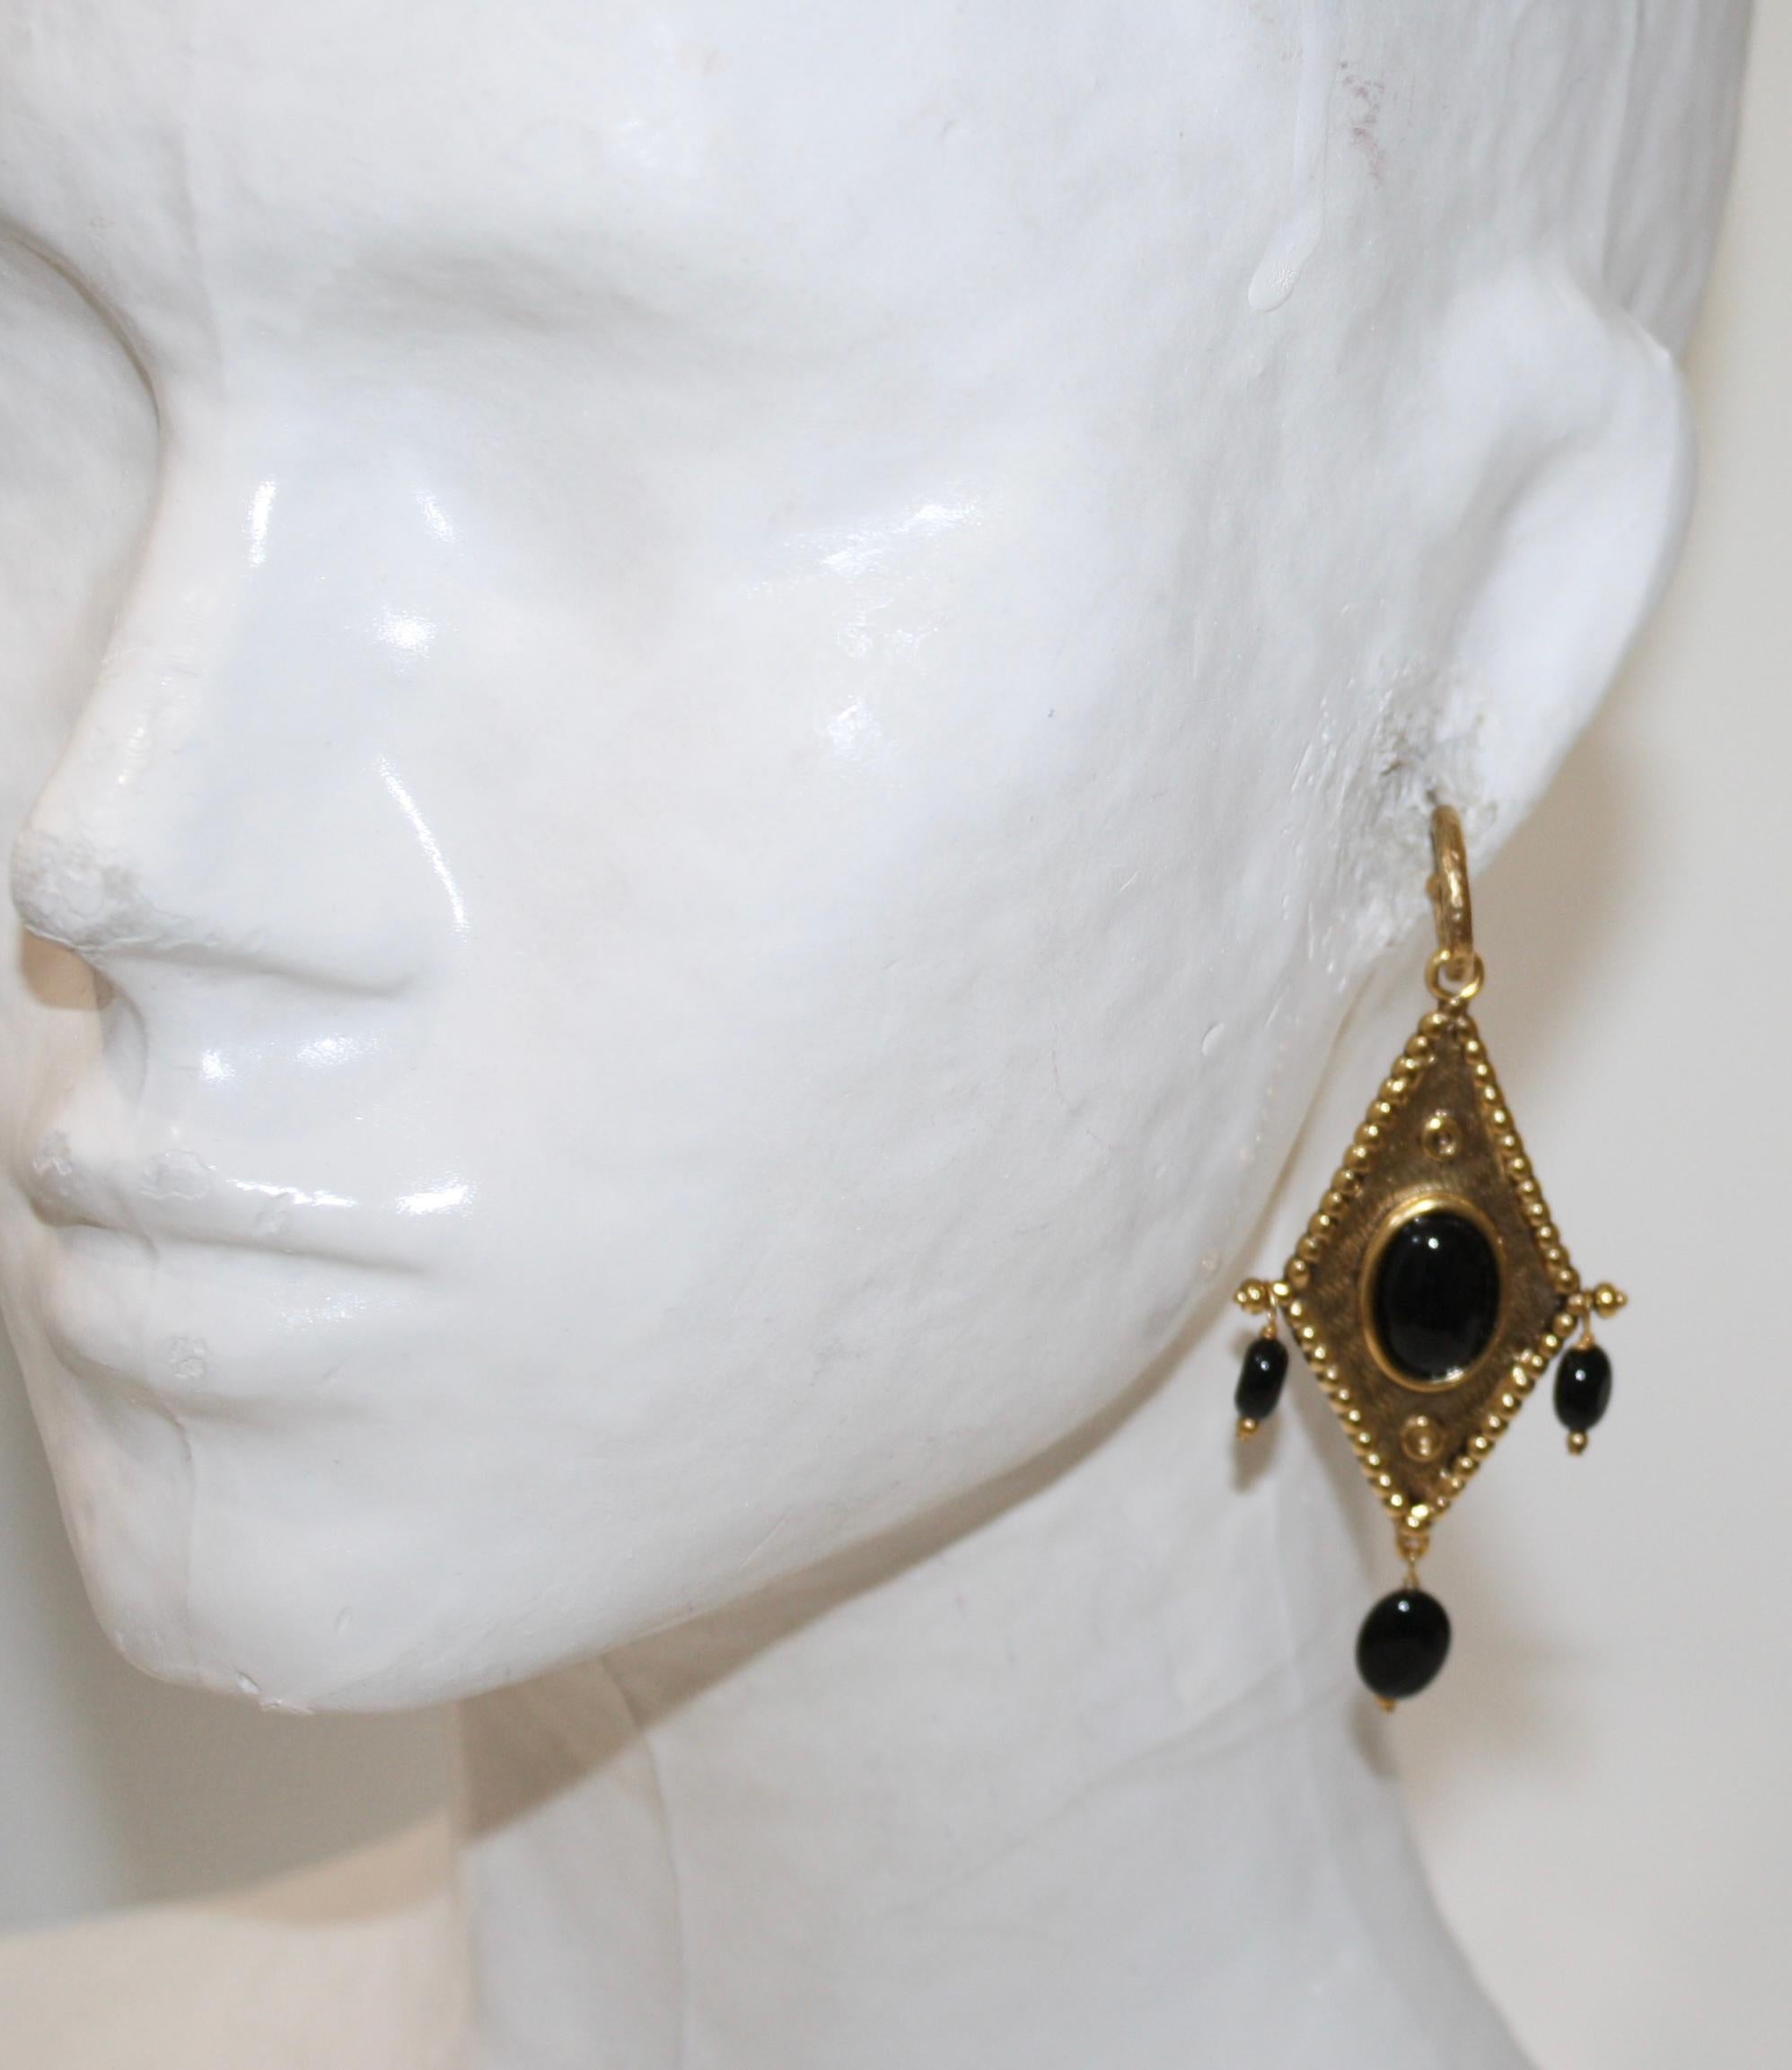 Essaouira 
rhombus earrings , pierced.

A Moroccan theme where Goossens cabochons are revisited as Berber jewelry thanks to the golden brass crafted in a raw way that contrasts with the hard stones and more sophisticated rock crystals. Rhombus